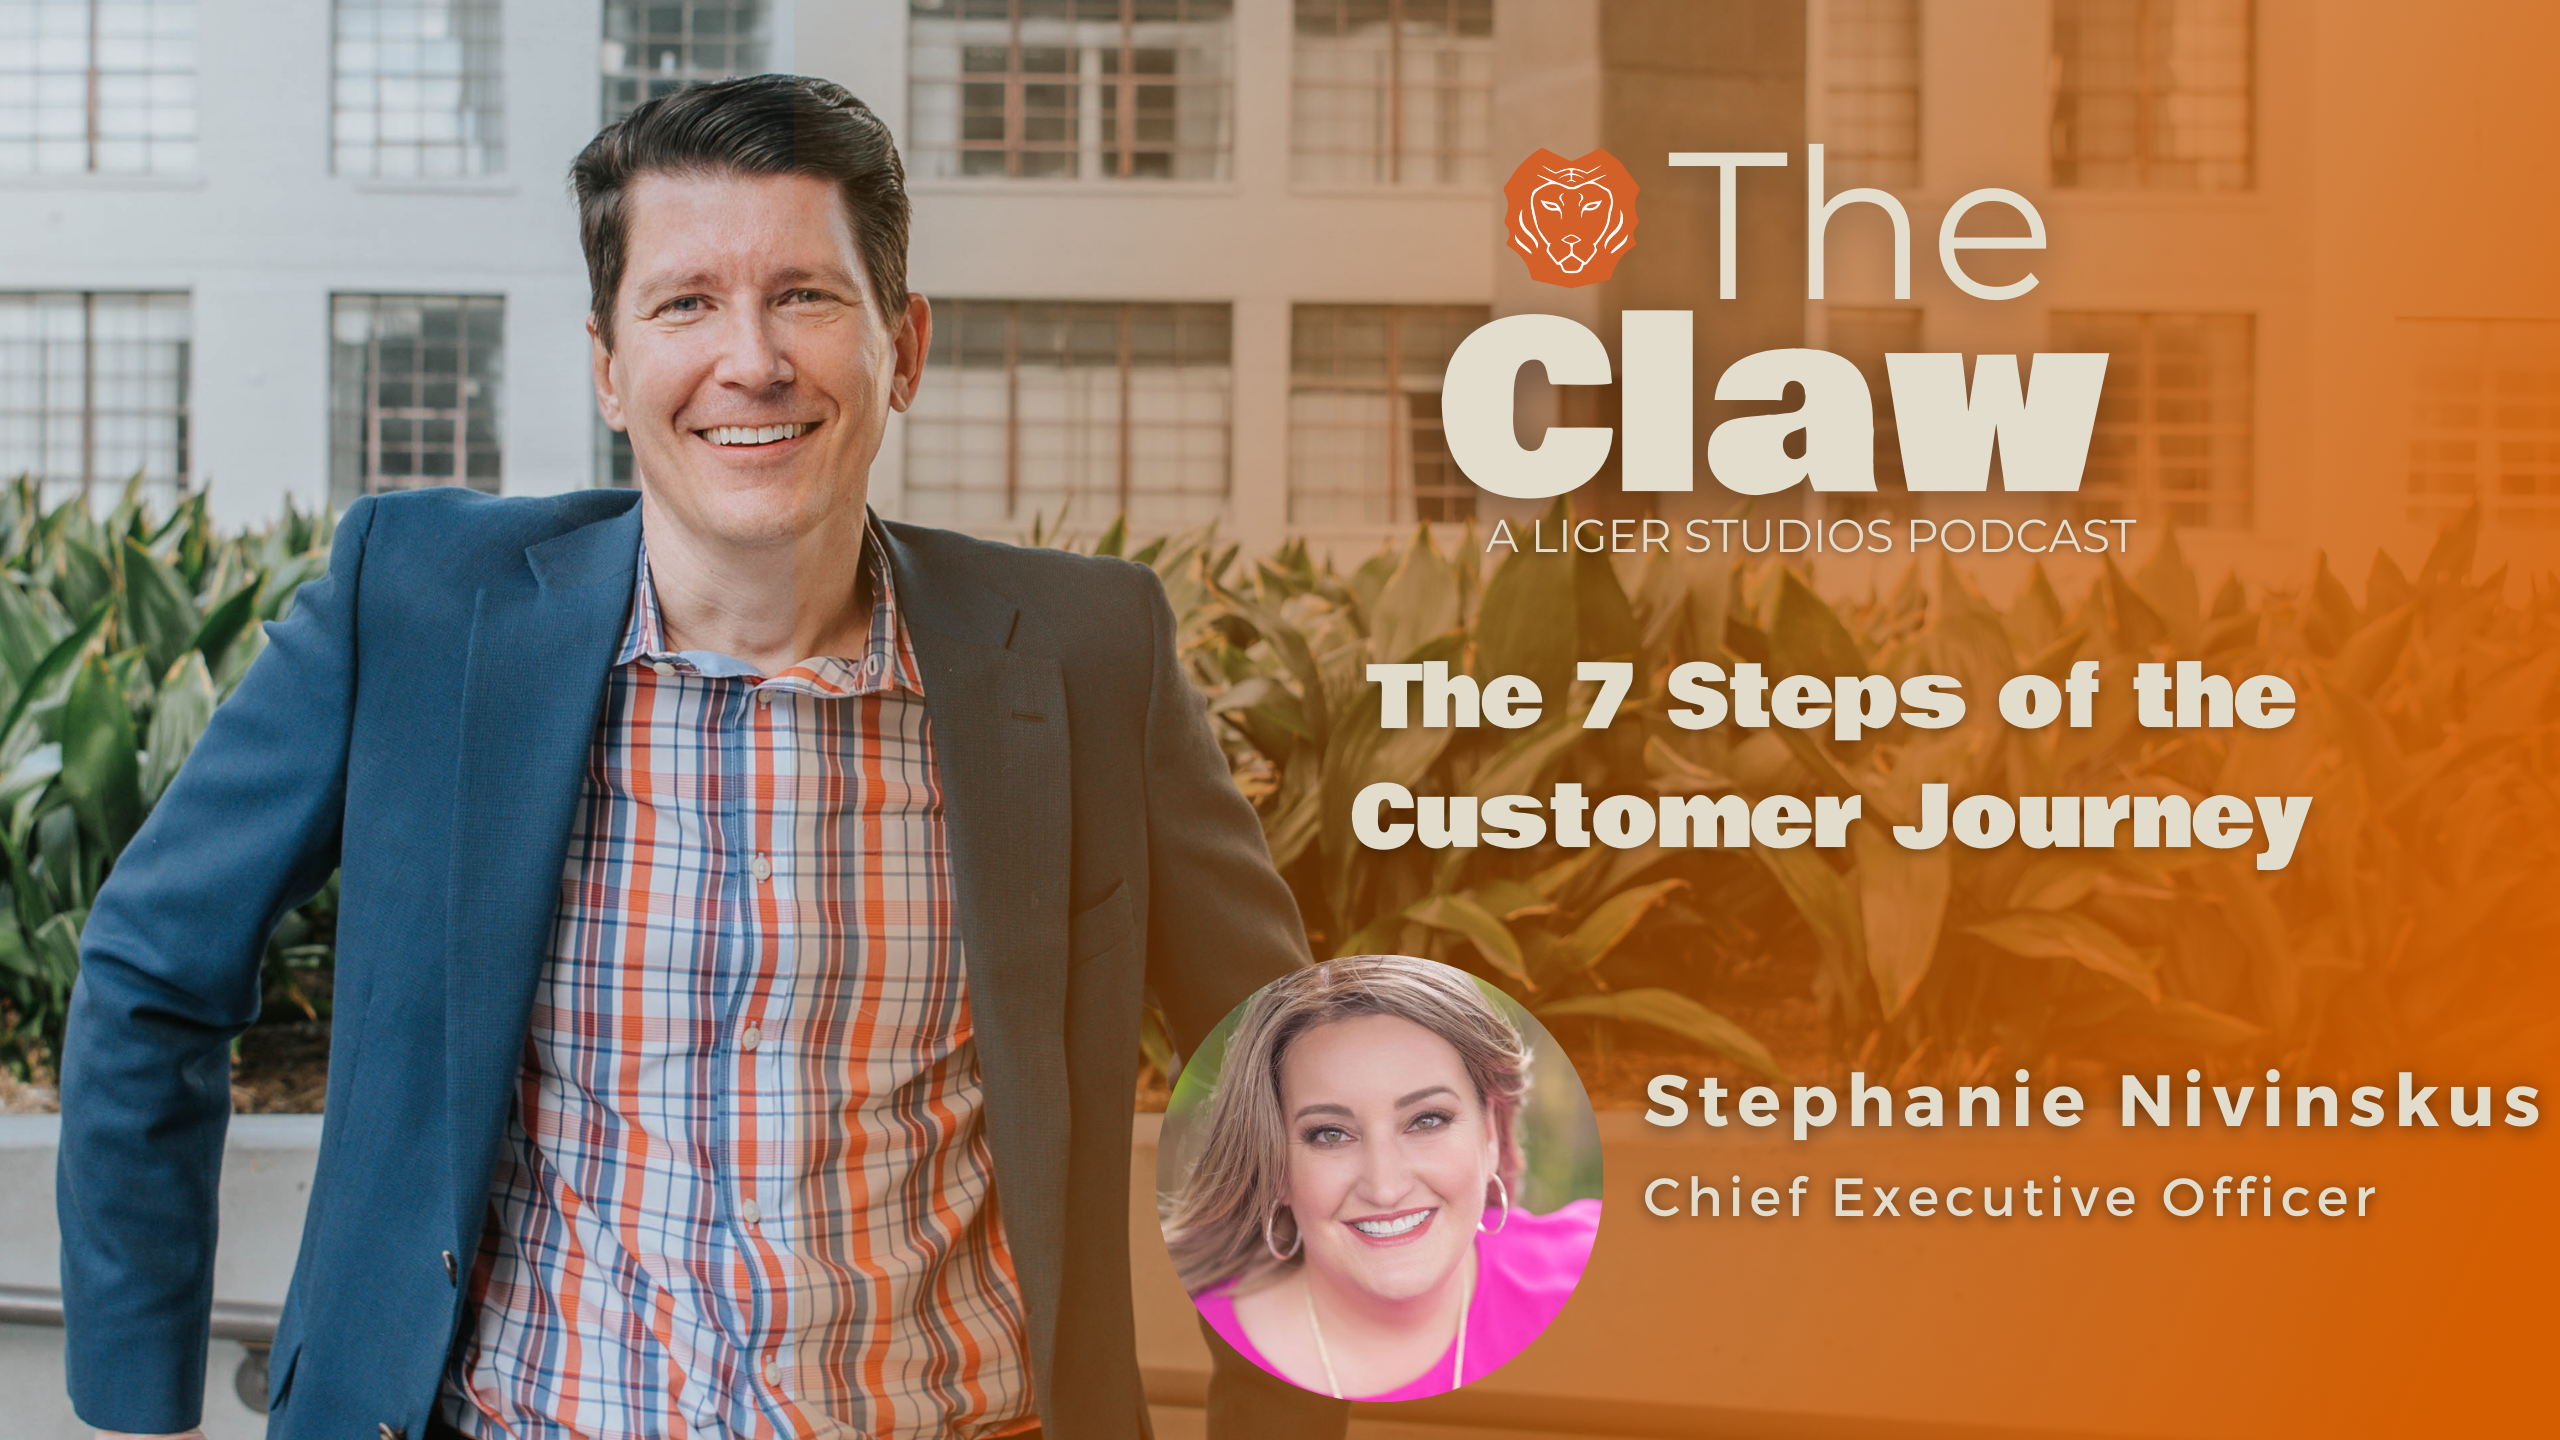 The Claw Podcast: The 7 Steps of the Customer Journey with Stephanie Nivinskus